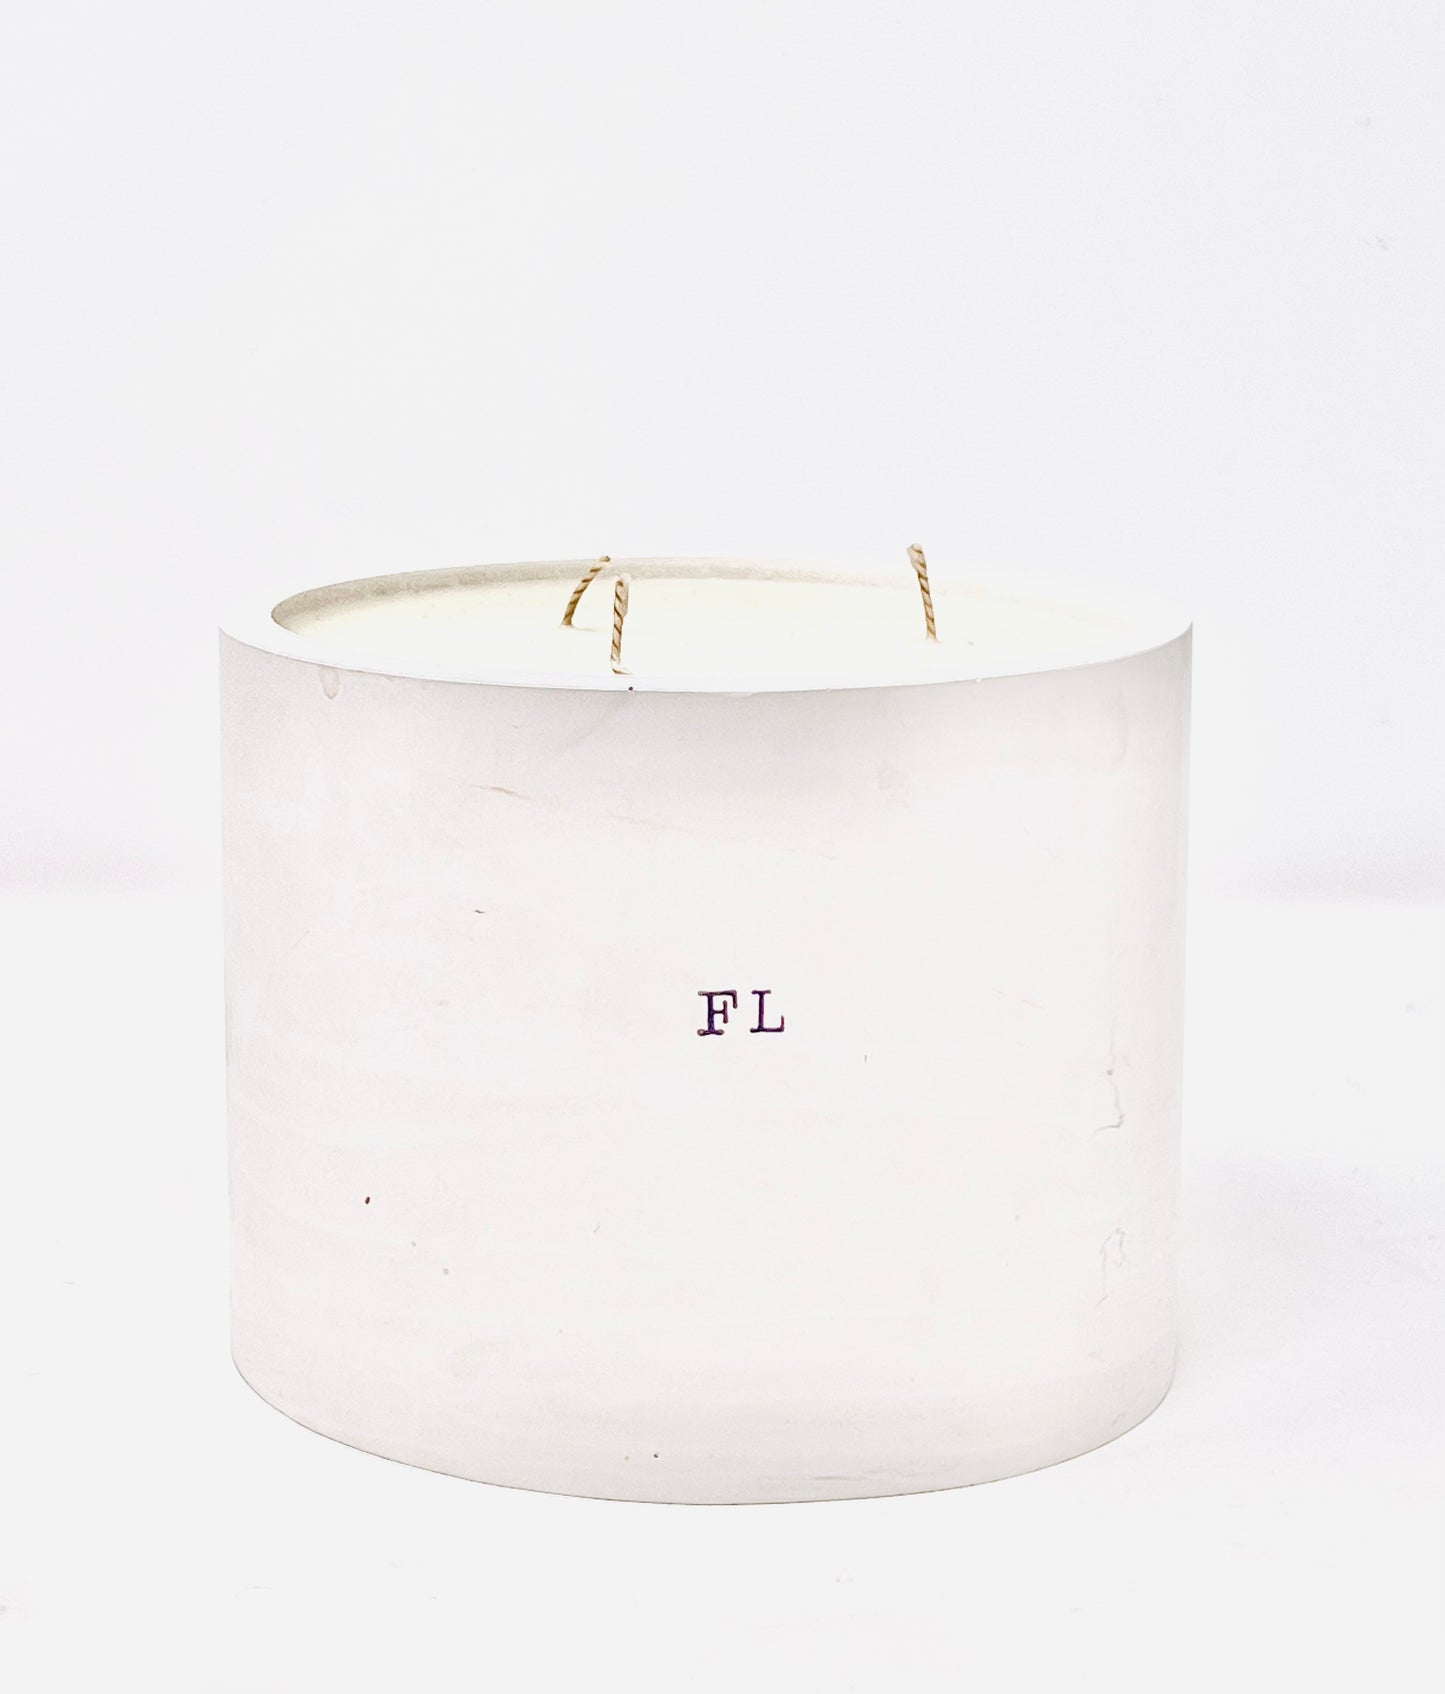 Beverly Hills Soy Candle, Slow Burn Candle